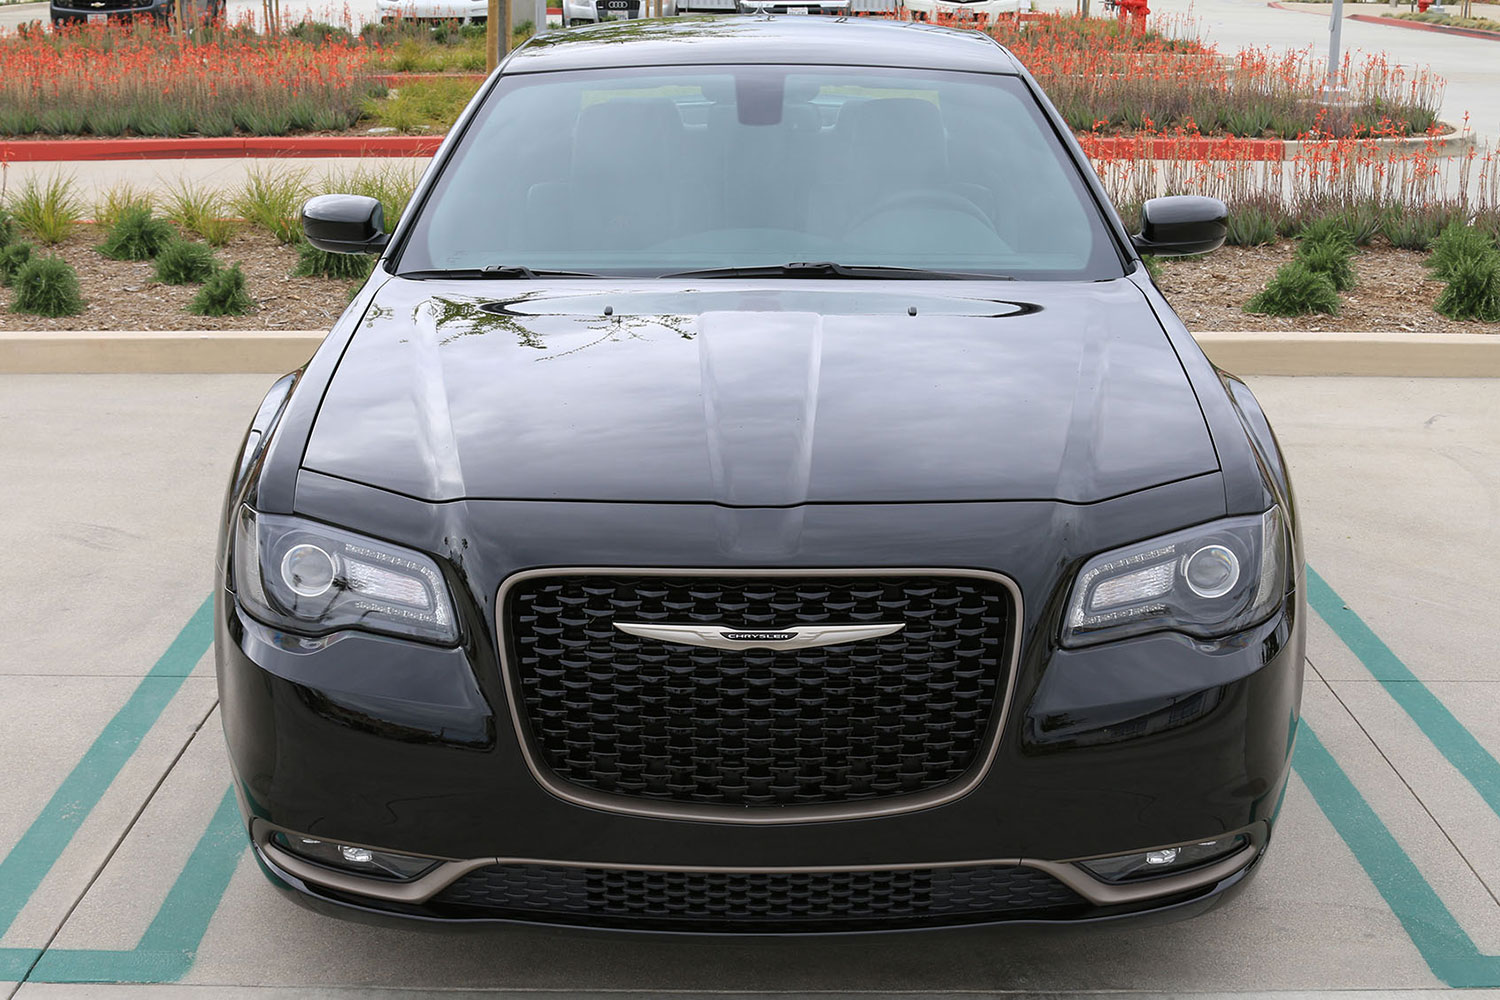 2016 Chrysler 300S Alloy Edition First Drive